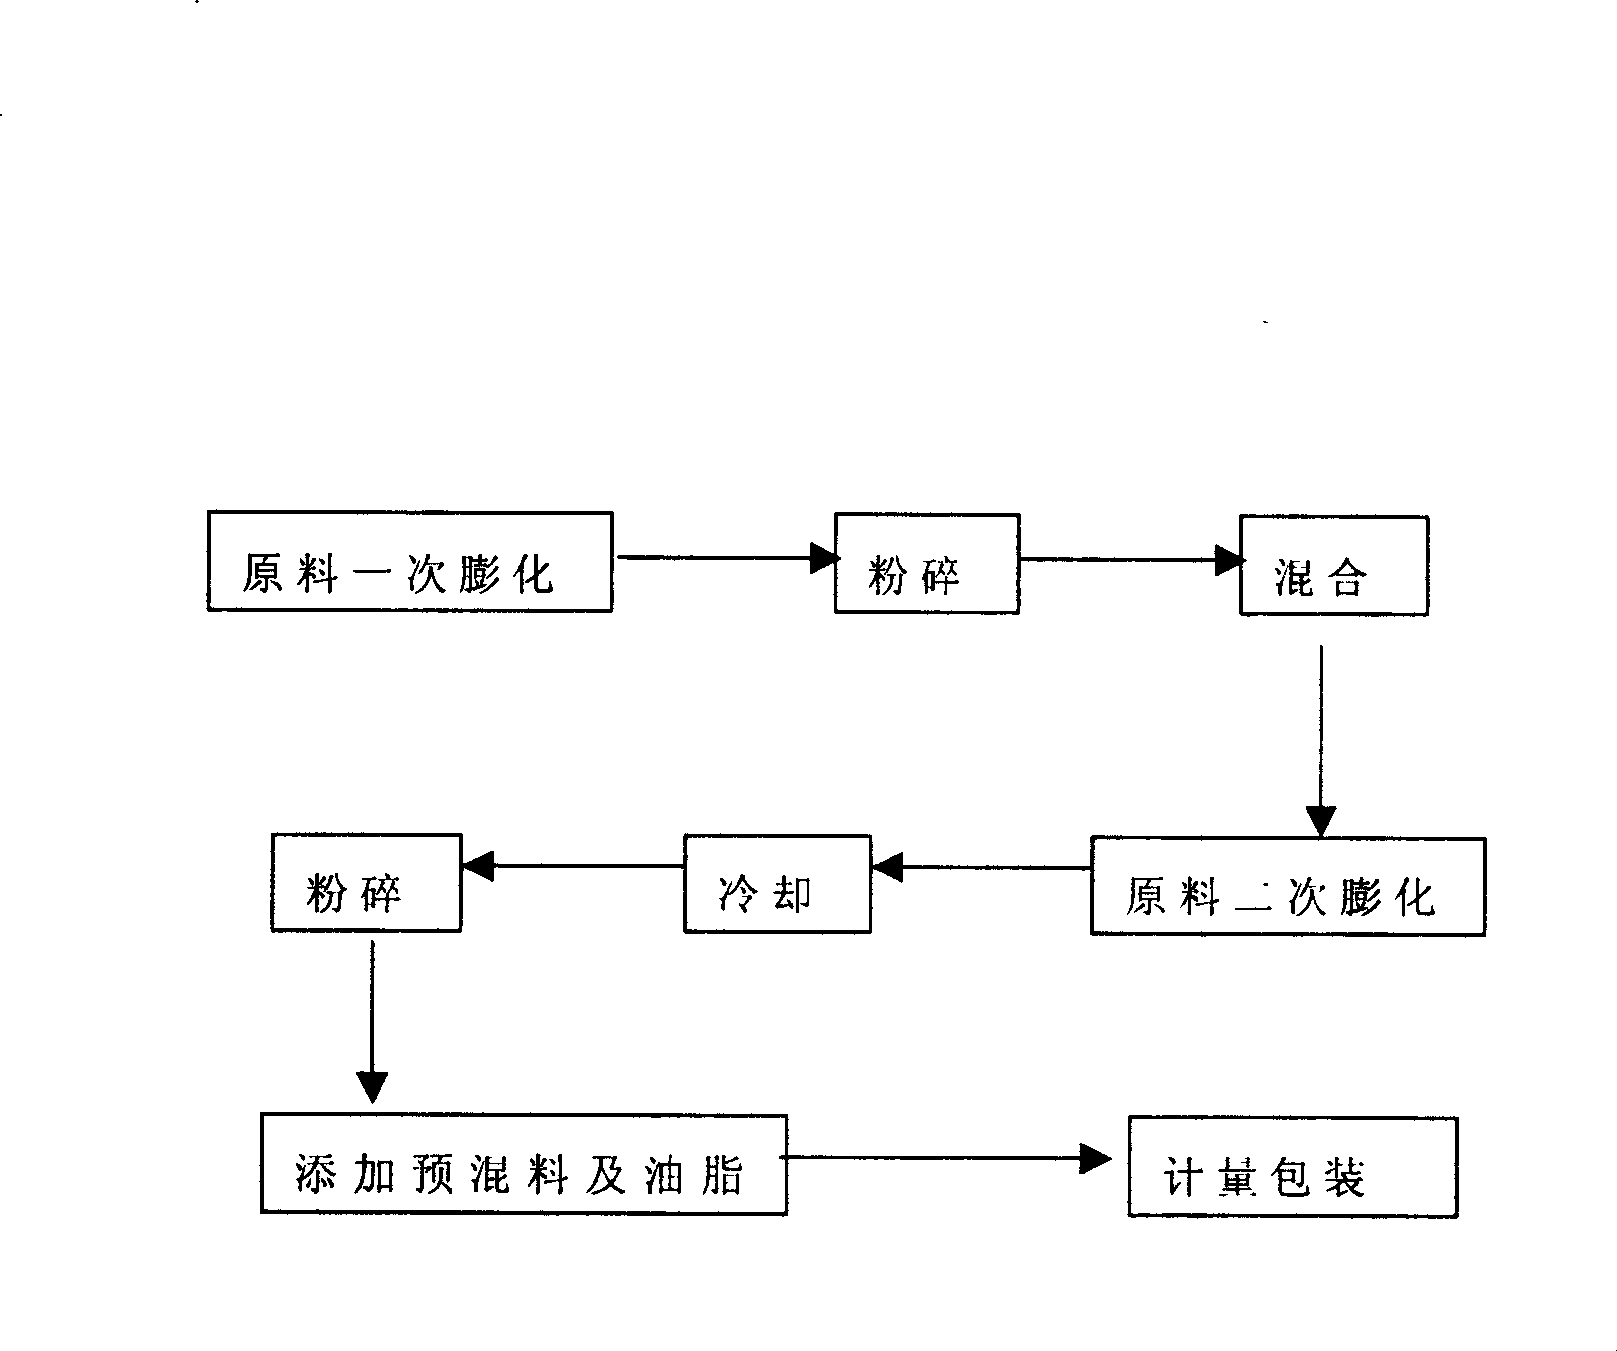 Feed fabricating method for special animal such as fox, ermine and raccoon dog